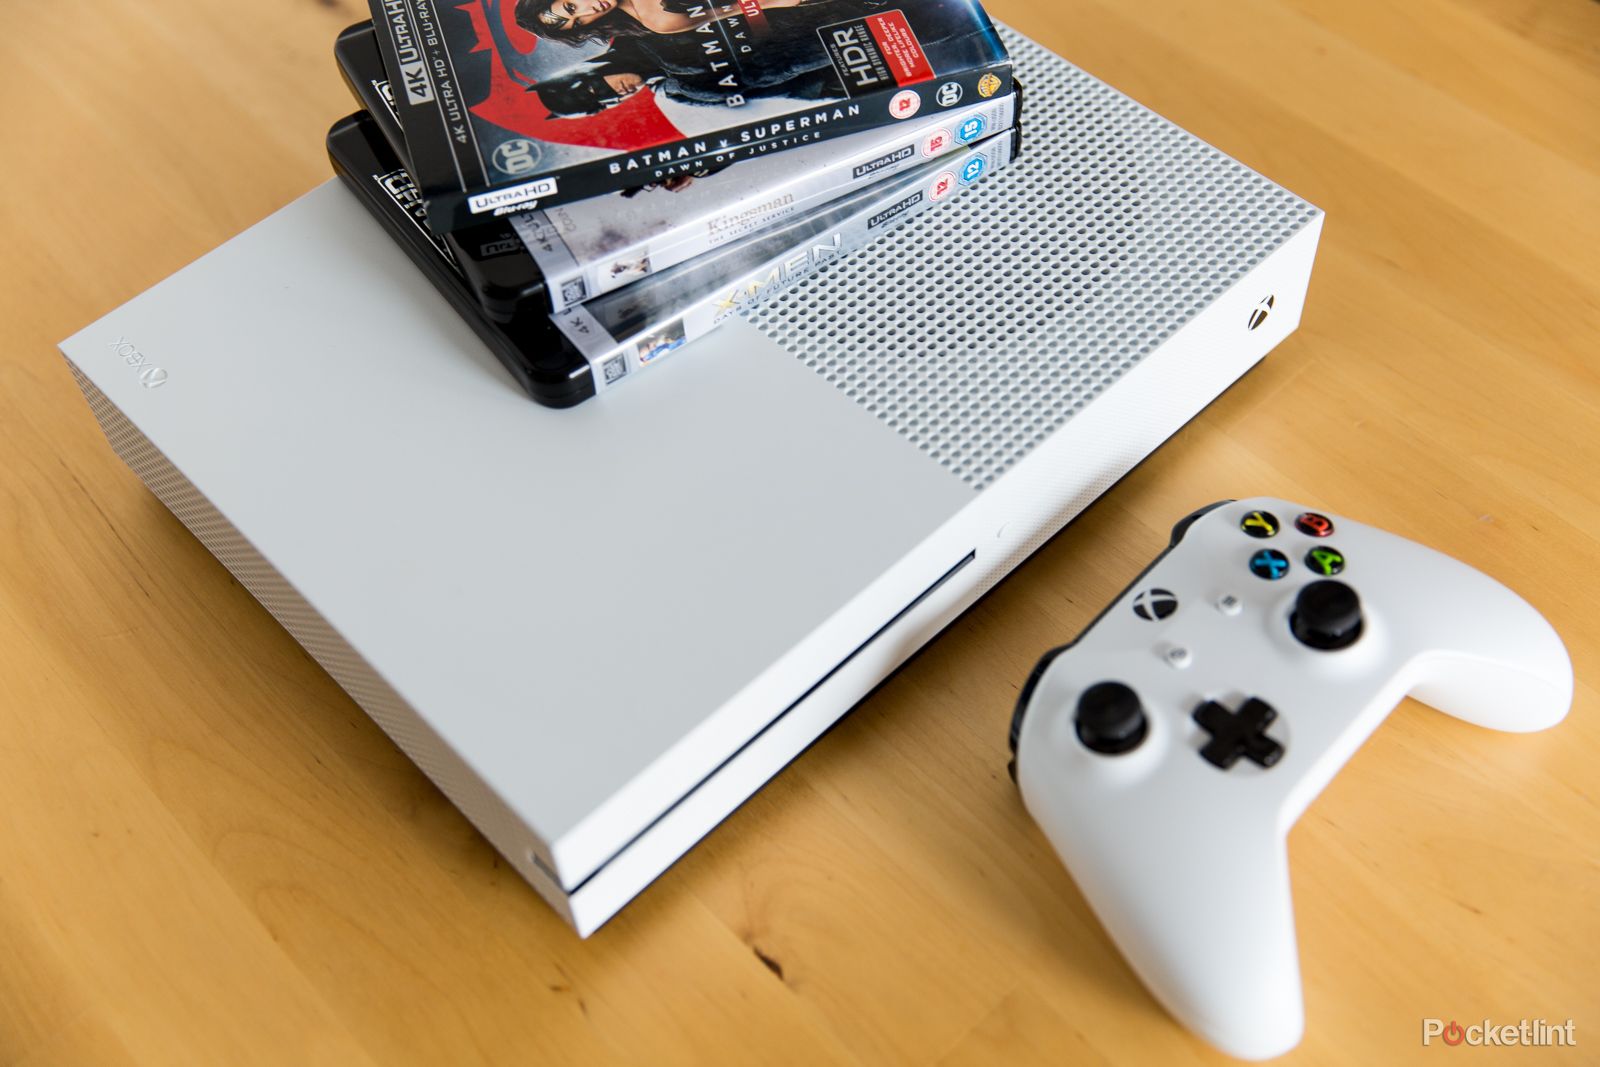 Microsoft quietly discontinued all Xbox One consoles last year photo 1